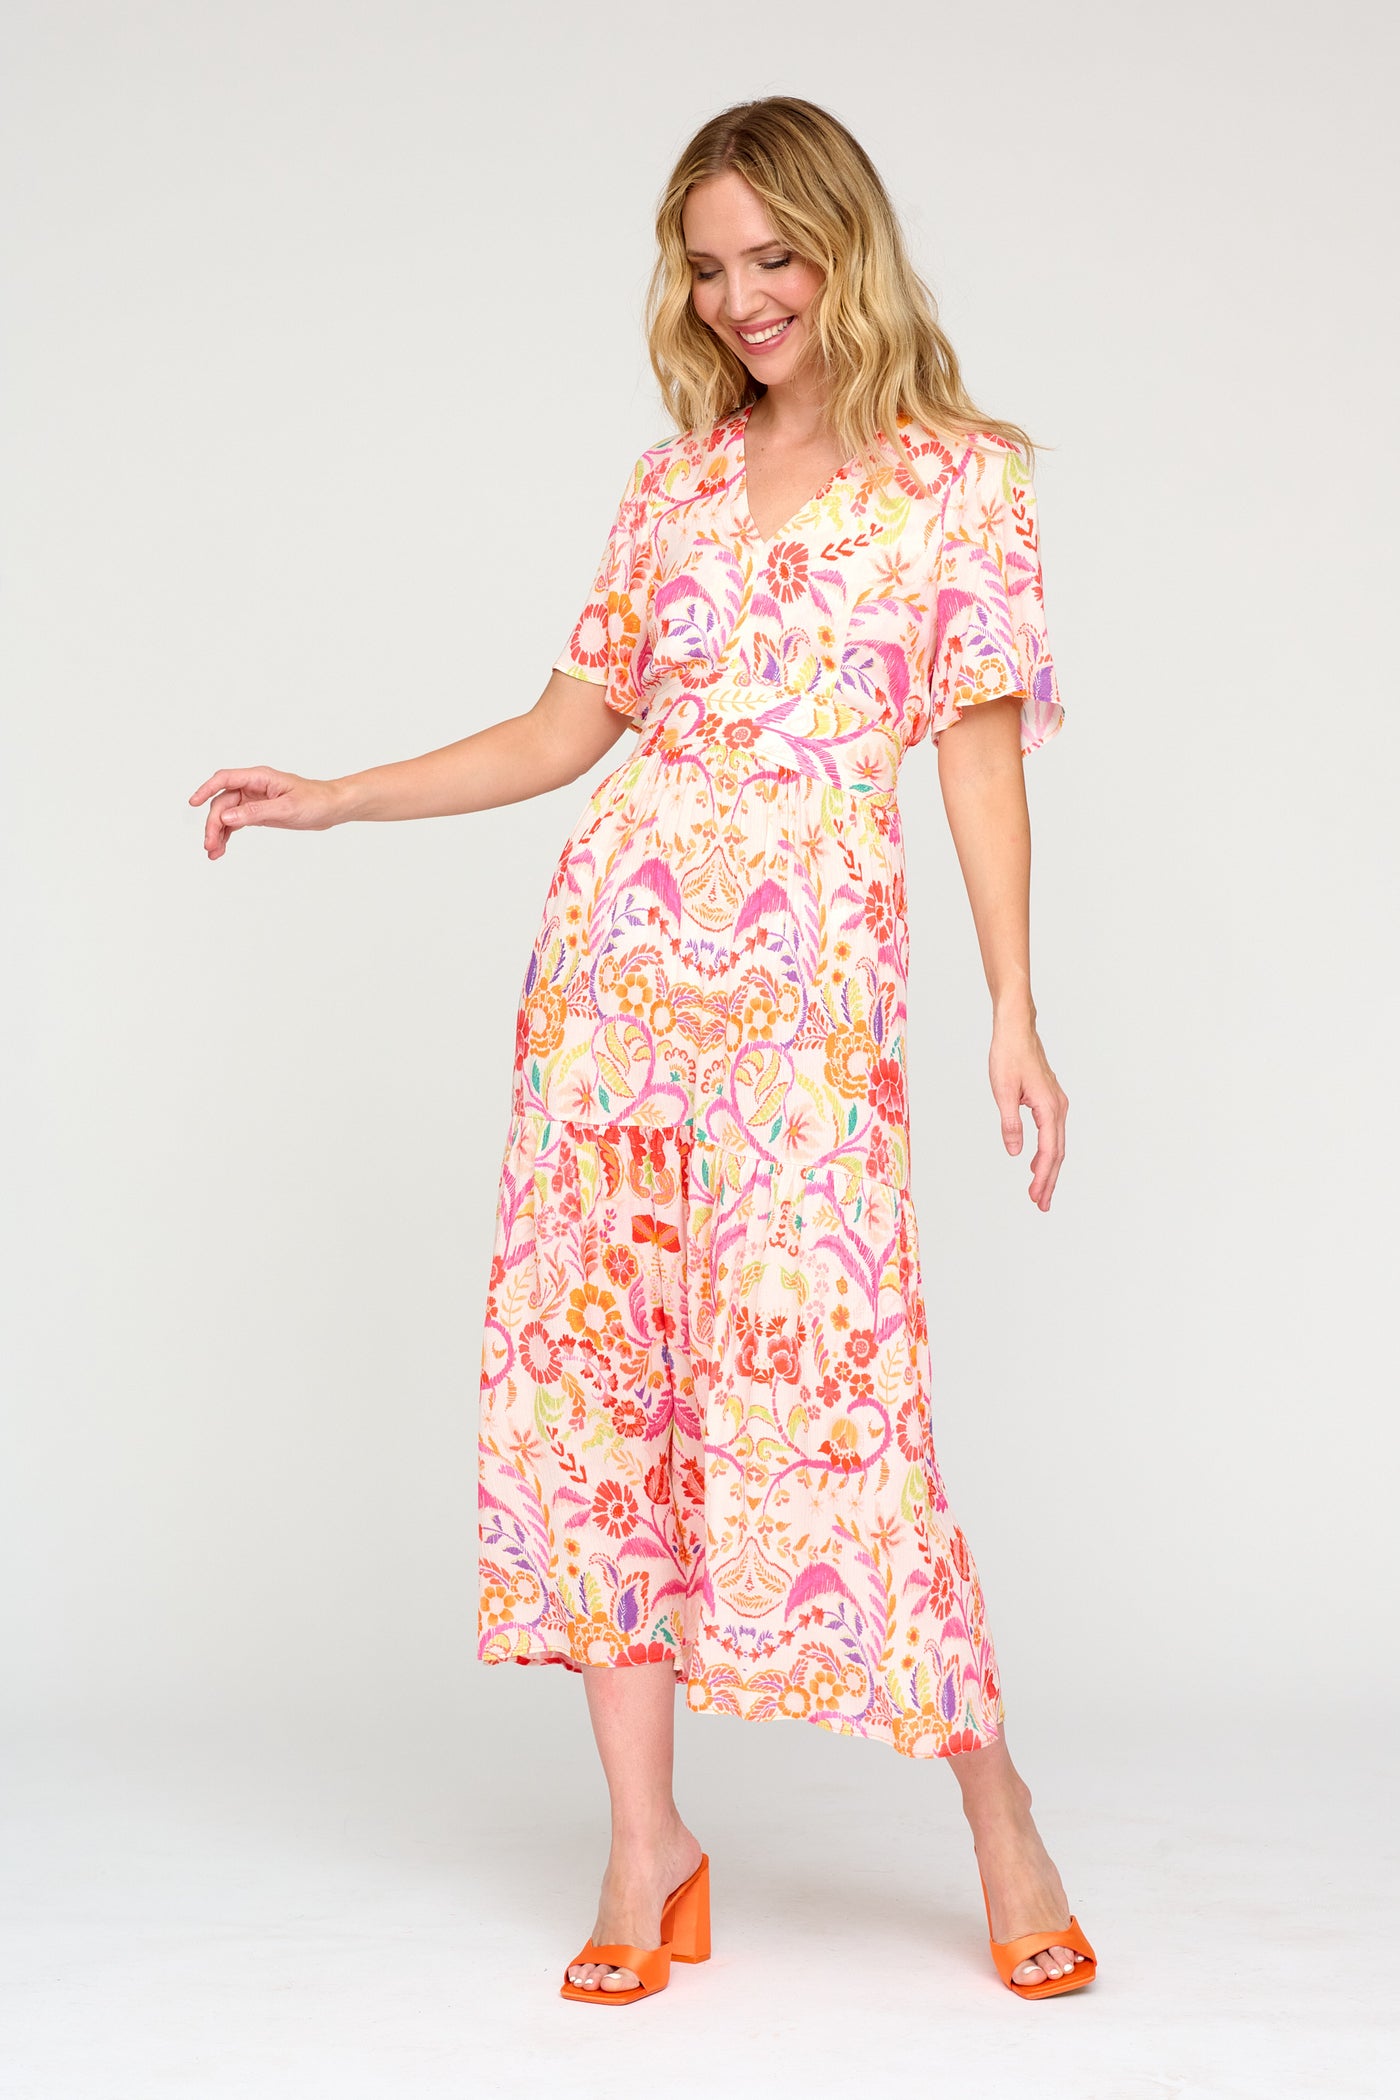 Pink & Orange Floral Dress with Bell Sleeve